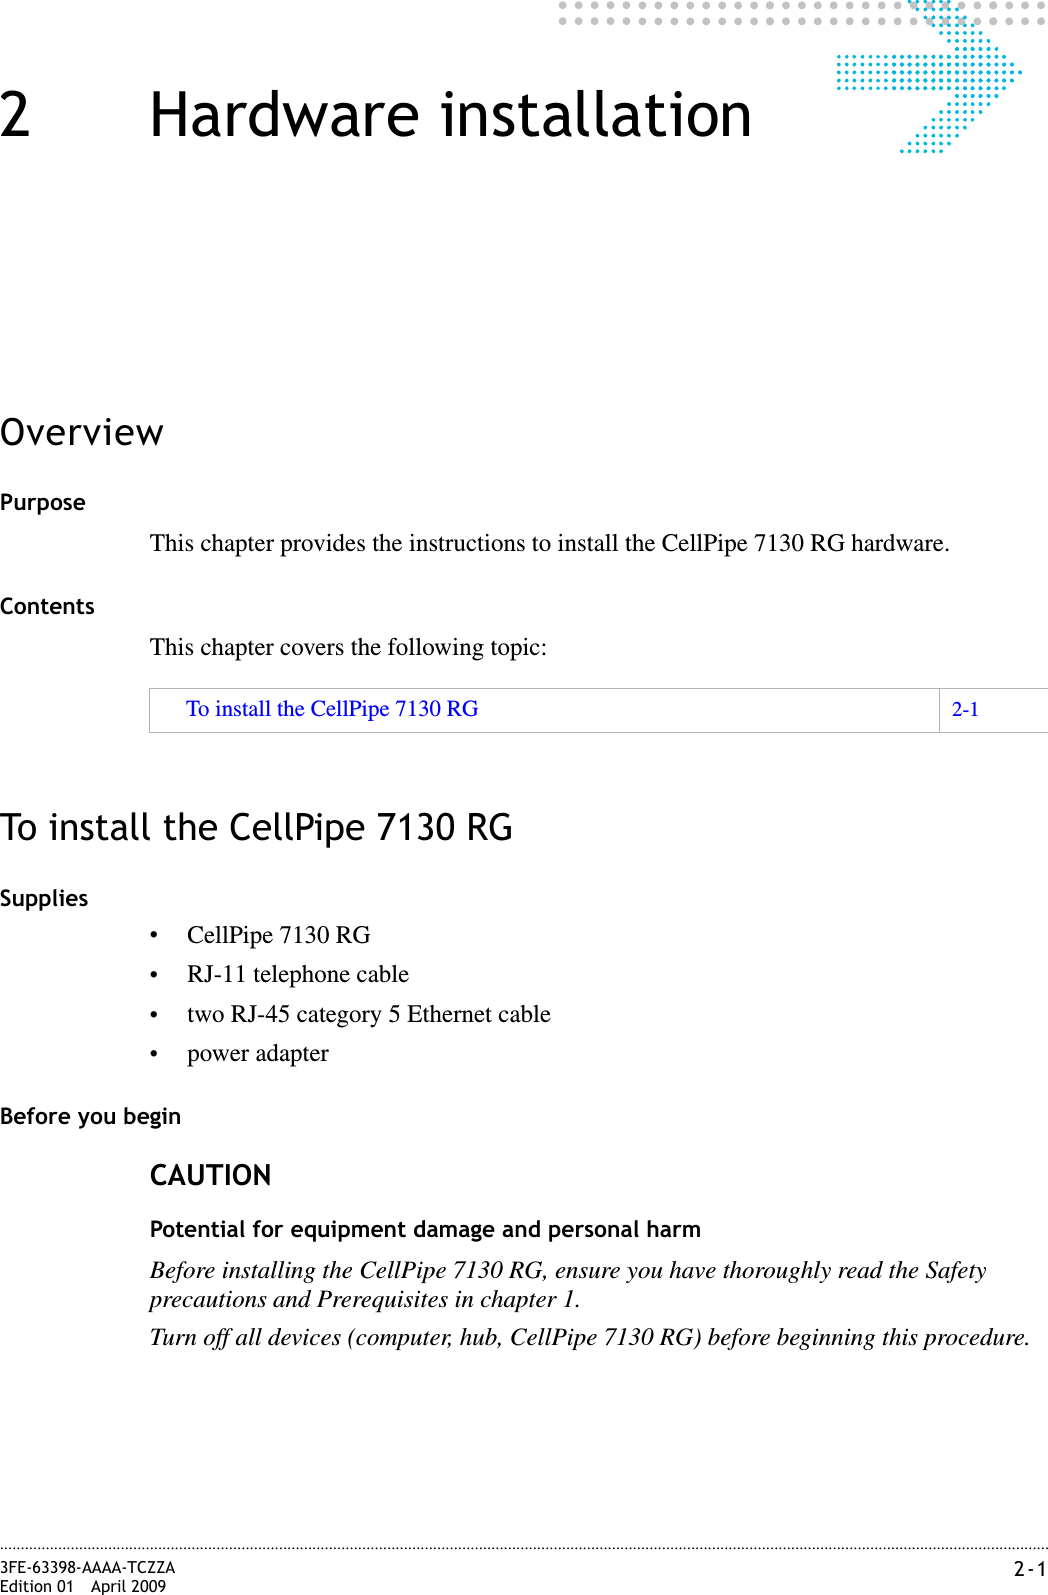 2-13FE-63398-AAAA-TCZZAEdition 01 April 2009............................................................................................................................................................................................................................................................2 Hardware installationOverviewPurposeThis chapter provides the instructions to install the CellPipe 7130 RG hardware.ContentsThis chapter covers the following topic:To install the CellPipe 7130 RGSupplies•CellPipe 7130 RG•RJ-11 telephone cable•two RJ-45 category 5 Ethernet cable•power adapterBefore you beginCAUTIONPotential for equipment damage and personal harmBefore installing the CellPipe 7130 RG, ensure you have thoroughly read the Safety precautions and Prerequisites in chapter 1.Turn off all devices (computer, hub, CellPipe 7130 RG) before beginning this procedure.To install the CellPipe 7130 RG 2-1